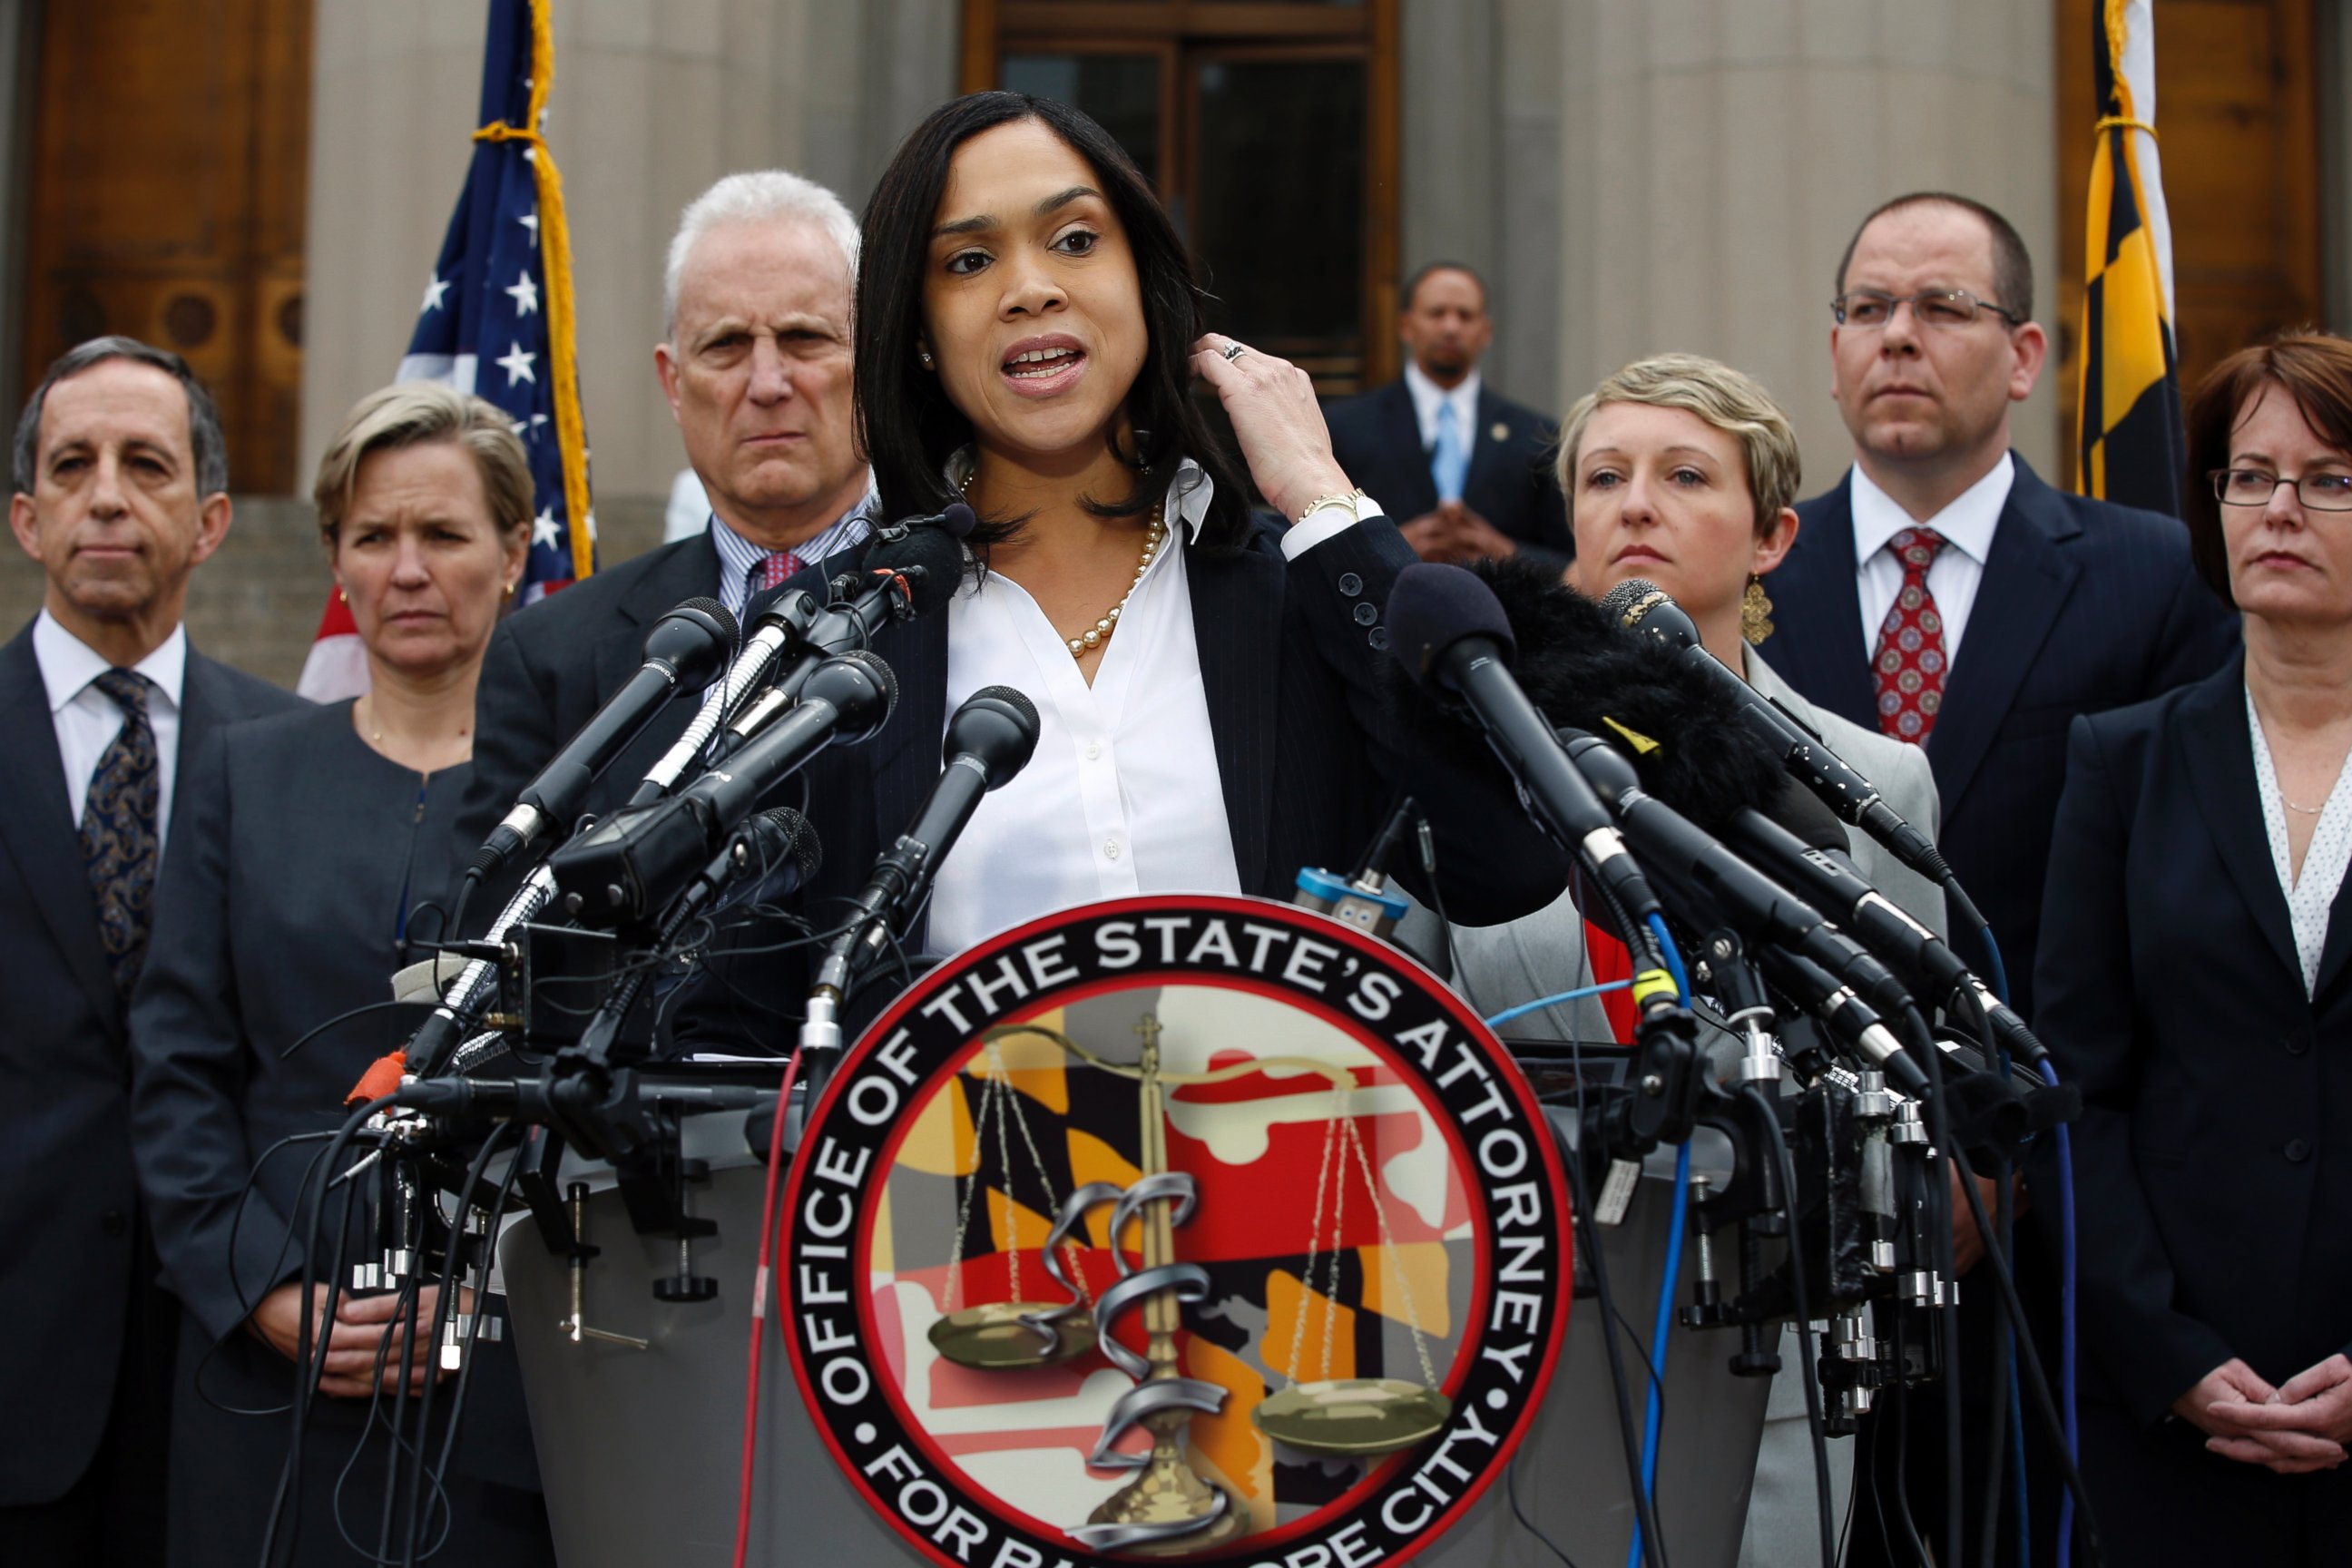 PHOTO: Marilyn Mosby, Baltimore state's attorney, speaks during a media availability, Friday, May 1, 2015 in Baltimore. 